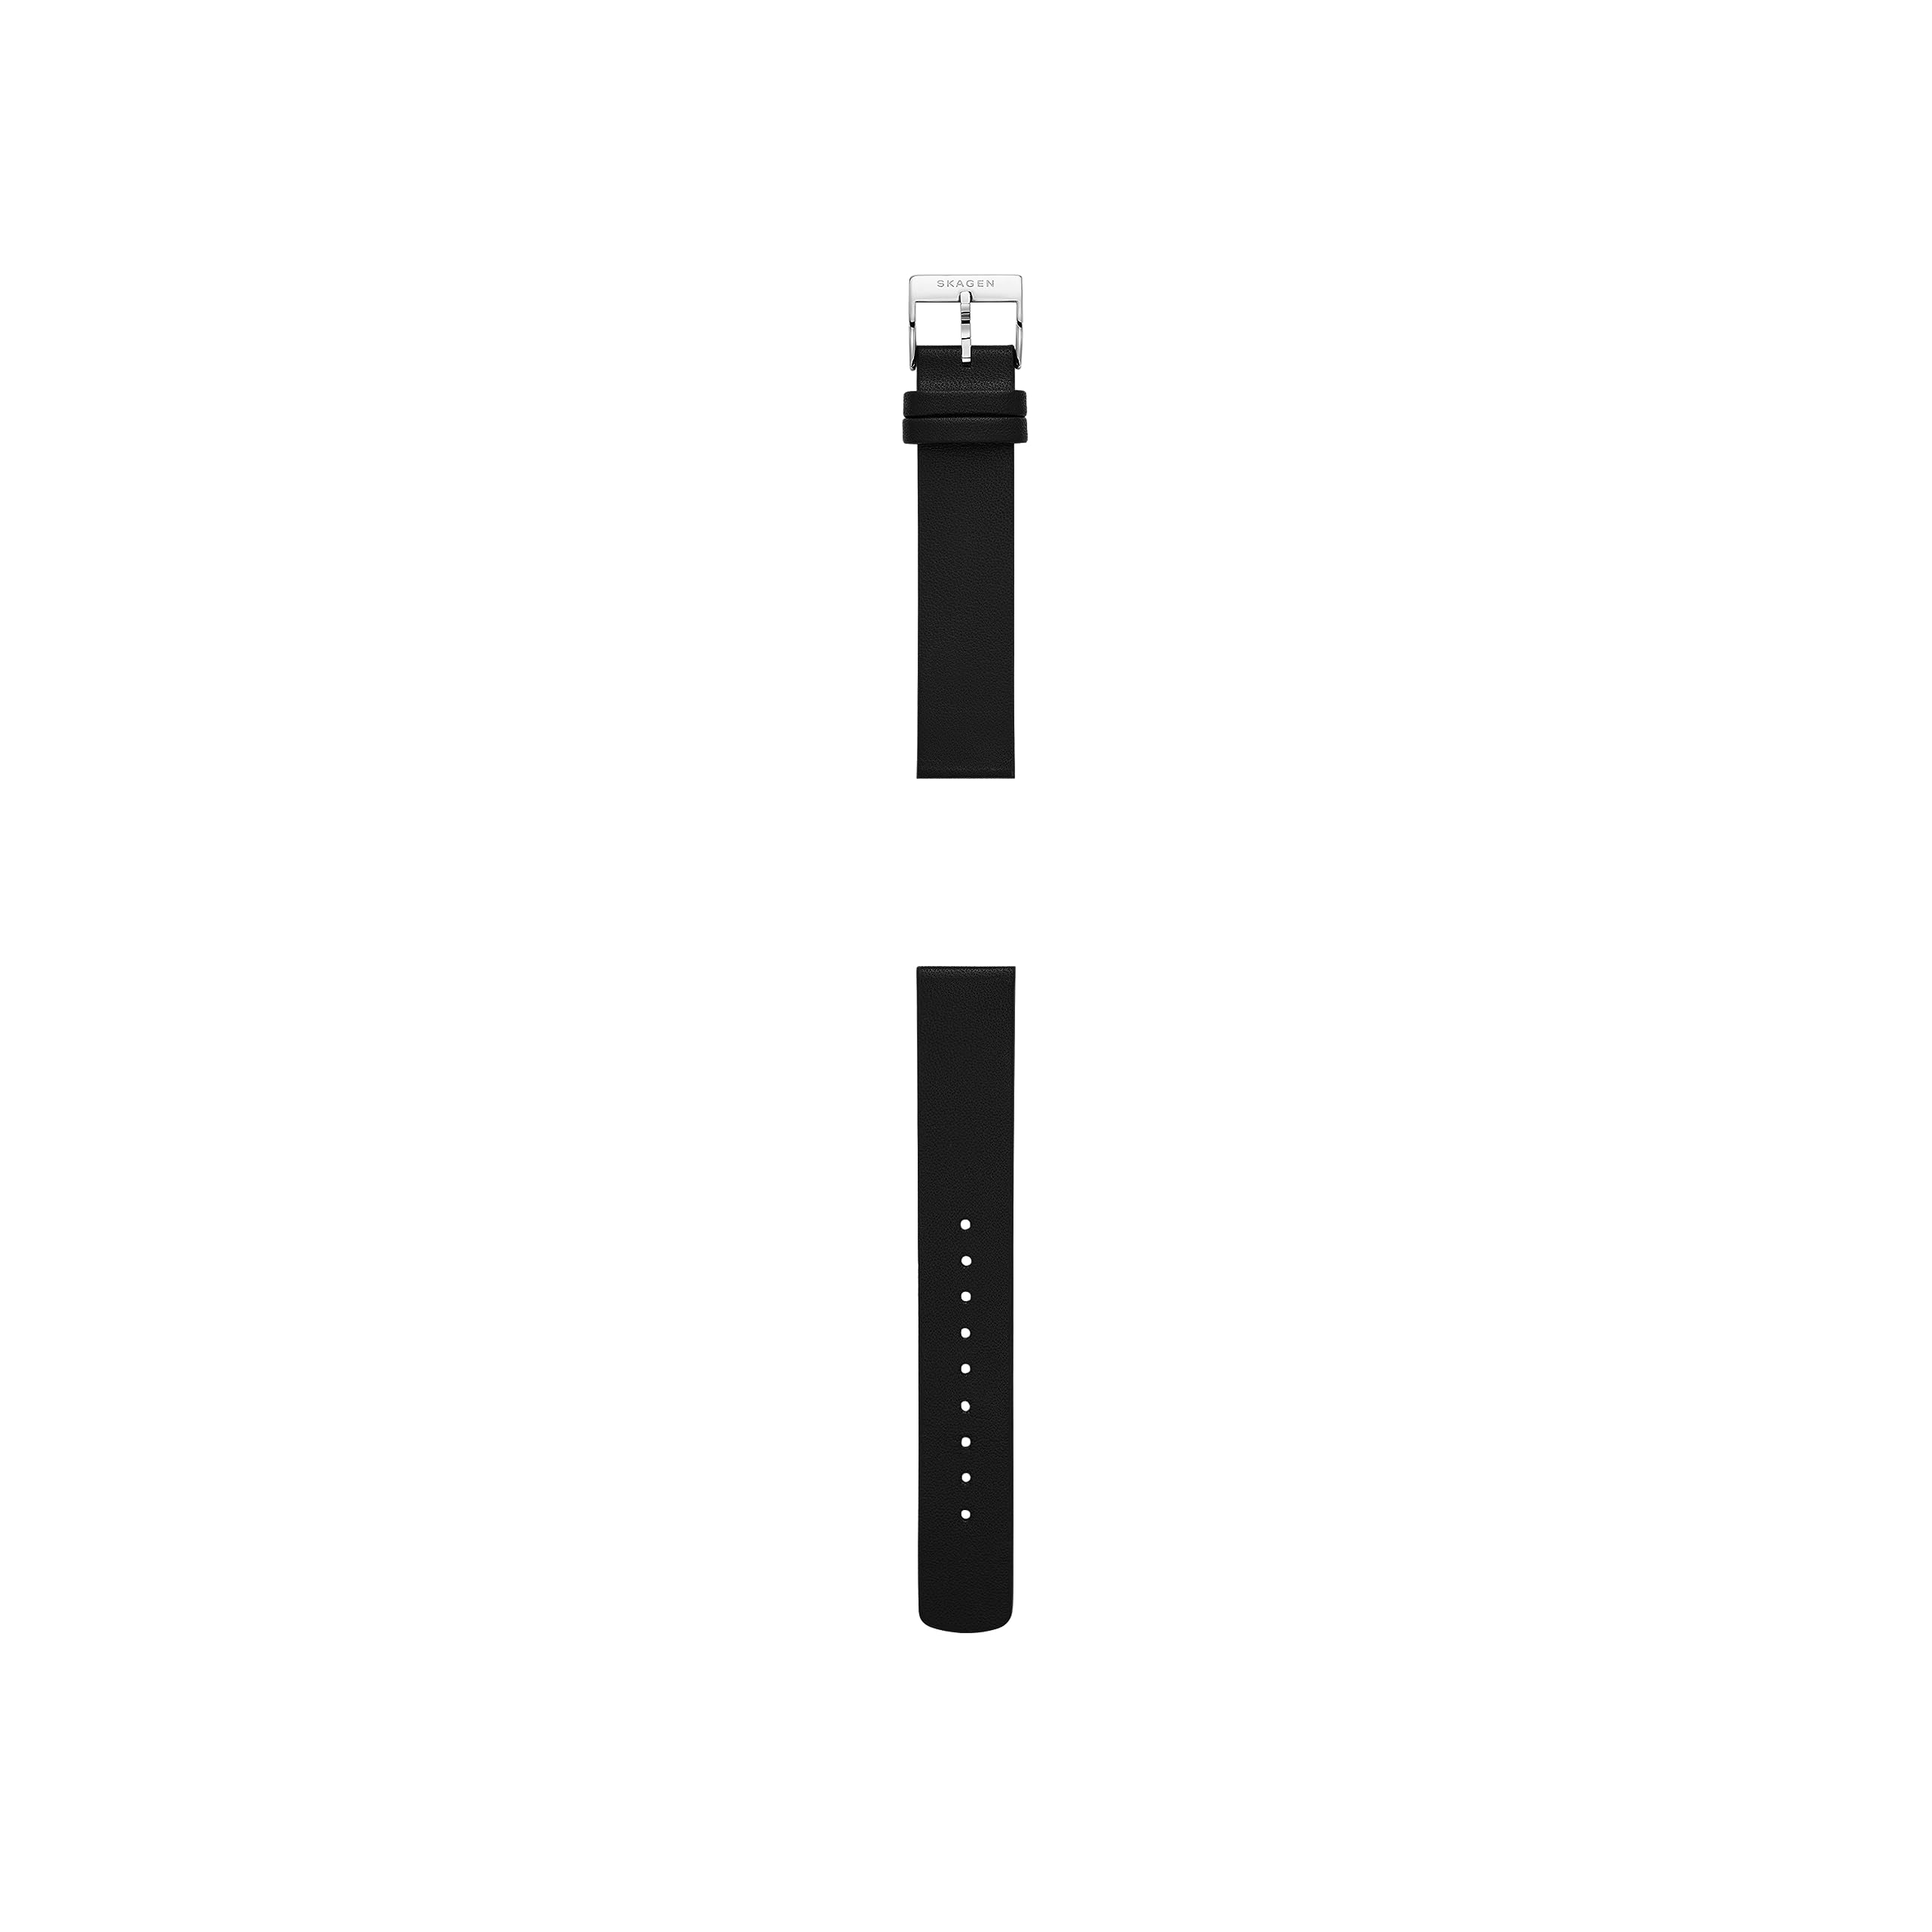 Skagen Watch Band, Stainless Steel or Leather Replacement Watch Band for Women and Men